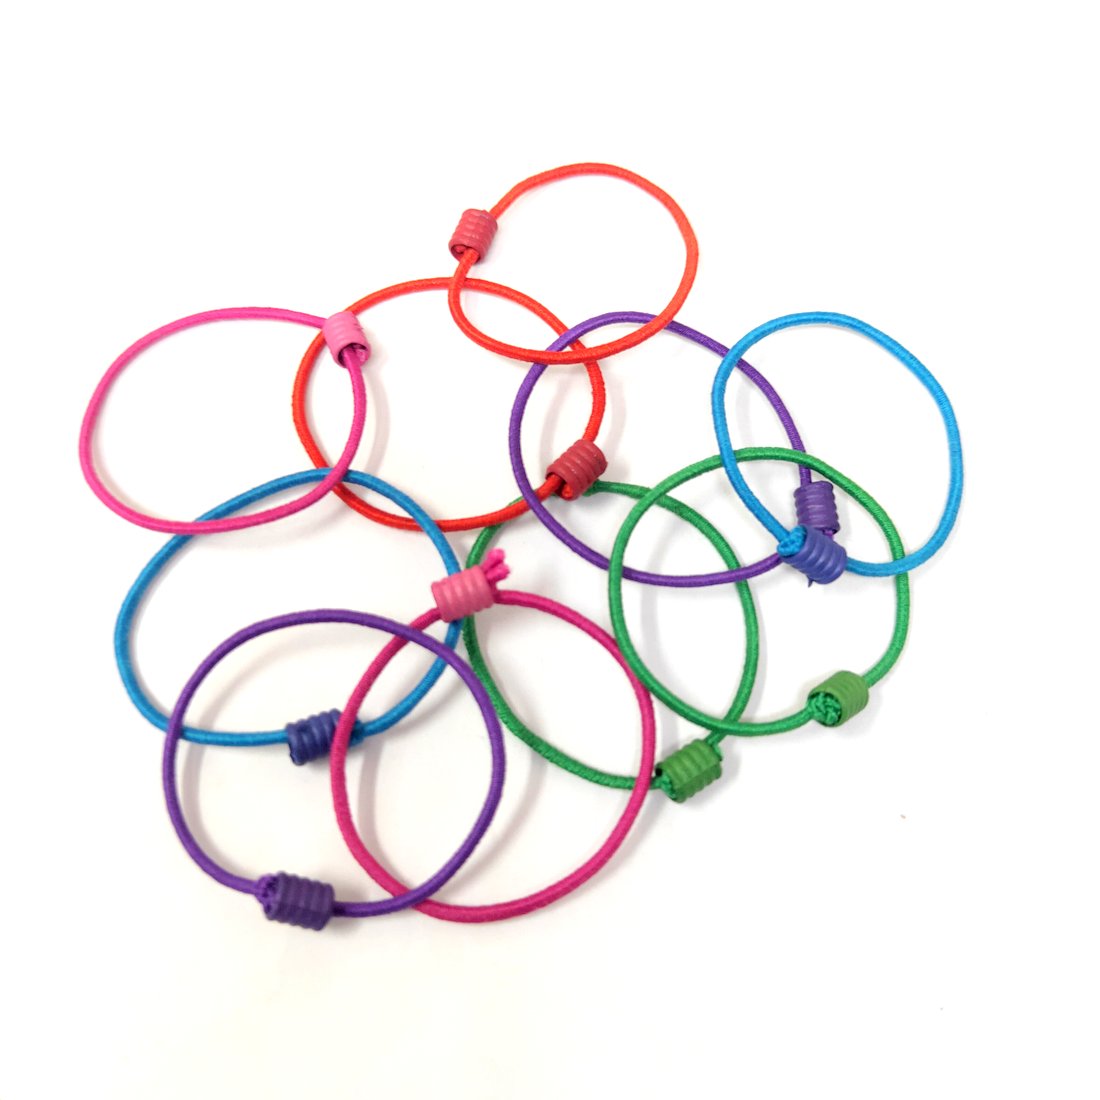 Anokhi Ada small size Elastic Rubber for Girls and Women (15-23 Ponytail Holders, 10 Pcs Assorted Colour Rubber)